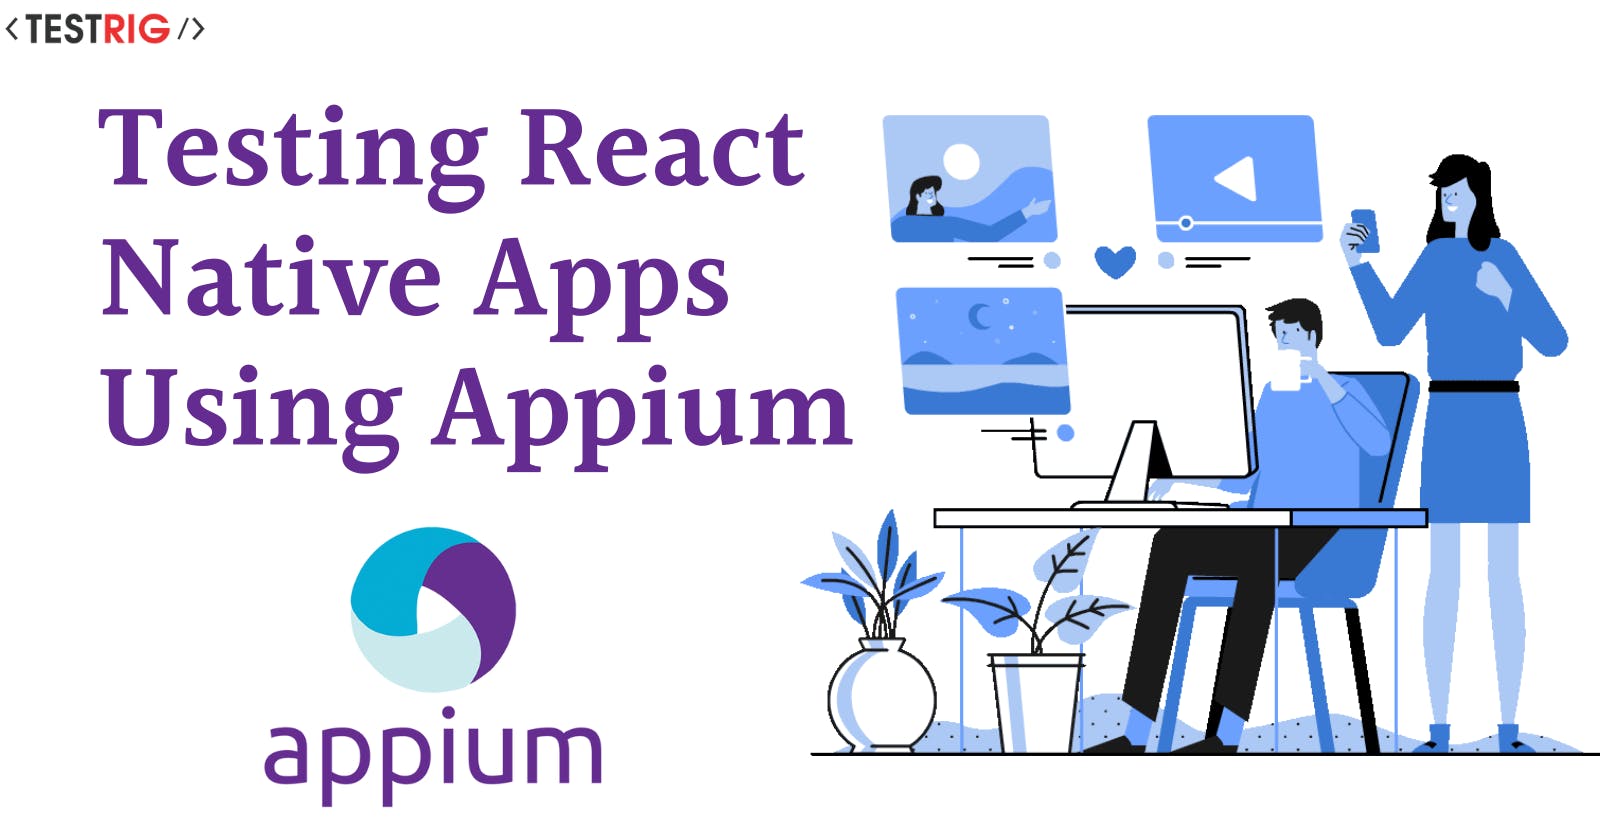 Testing React Native Apps Using Appium